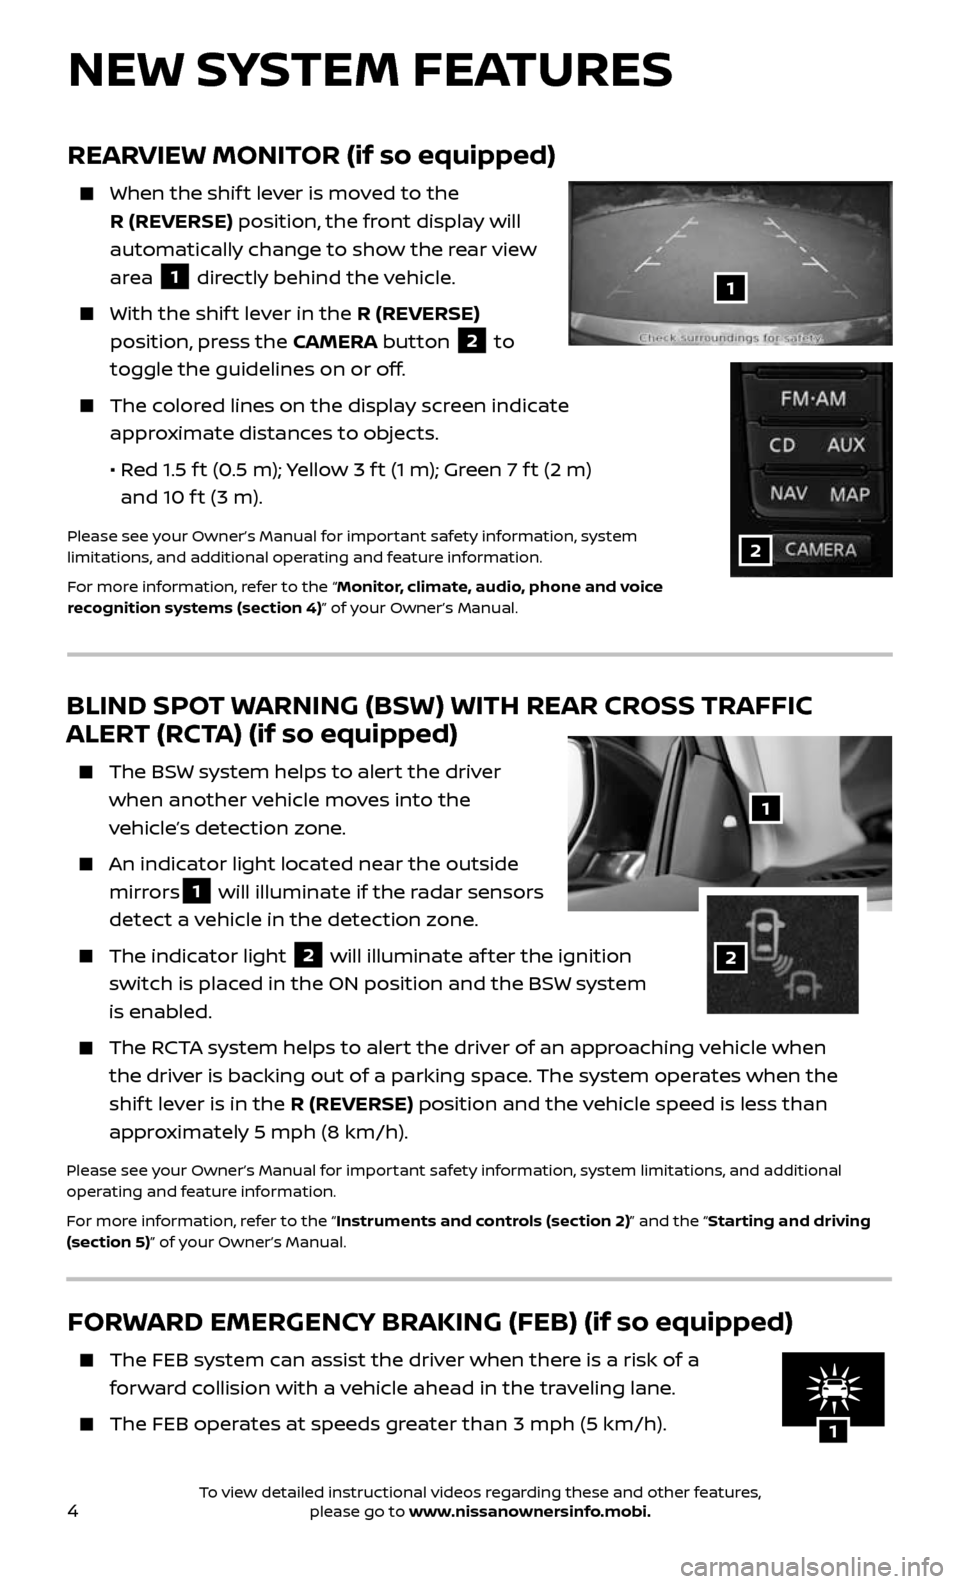 NISSAN ALTIMA 2017 L33 / 5.G Quick Reference Guide 4
FORWARD EMERGENCY BRAKING (FEB) (if so equipped)
    The FEB system can assist the driver when there is a risk of a 
forward collision with a vehicle ahead in the traveling lane.
    The FEB operate